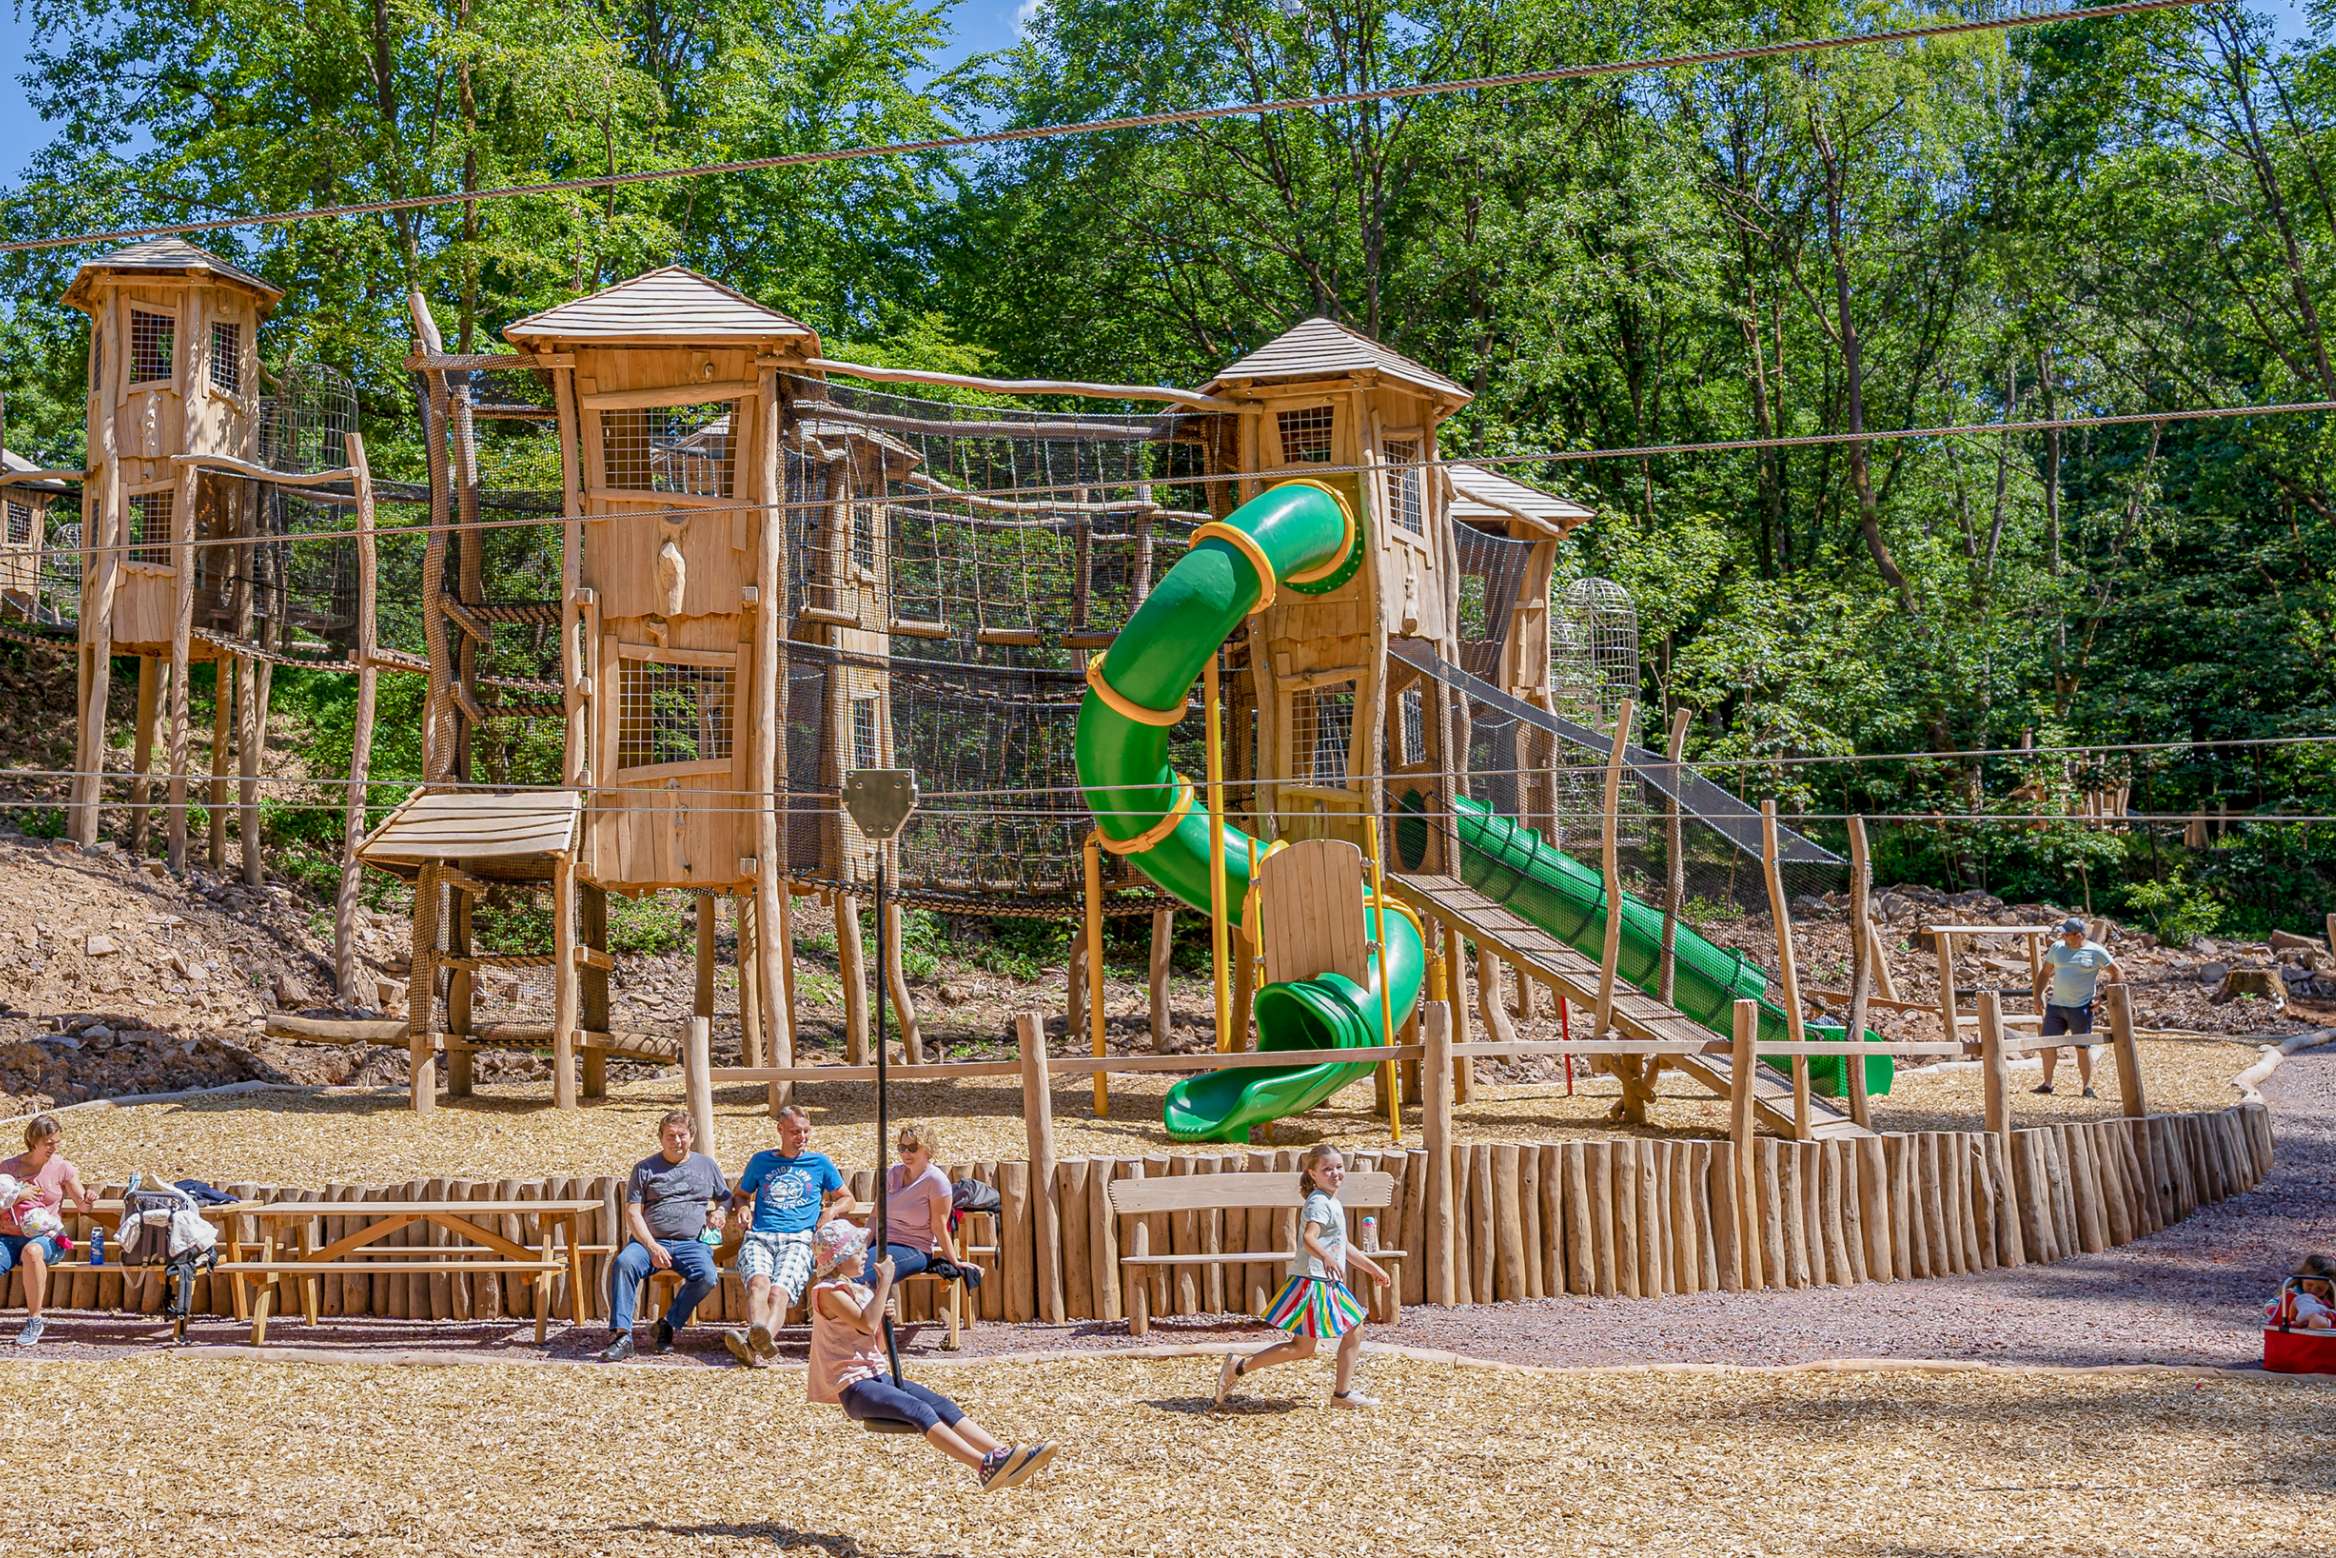 Children and families play on the equipment in the Adventure Forest Saarschleife.